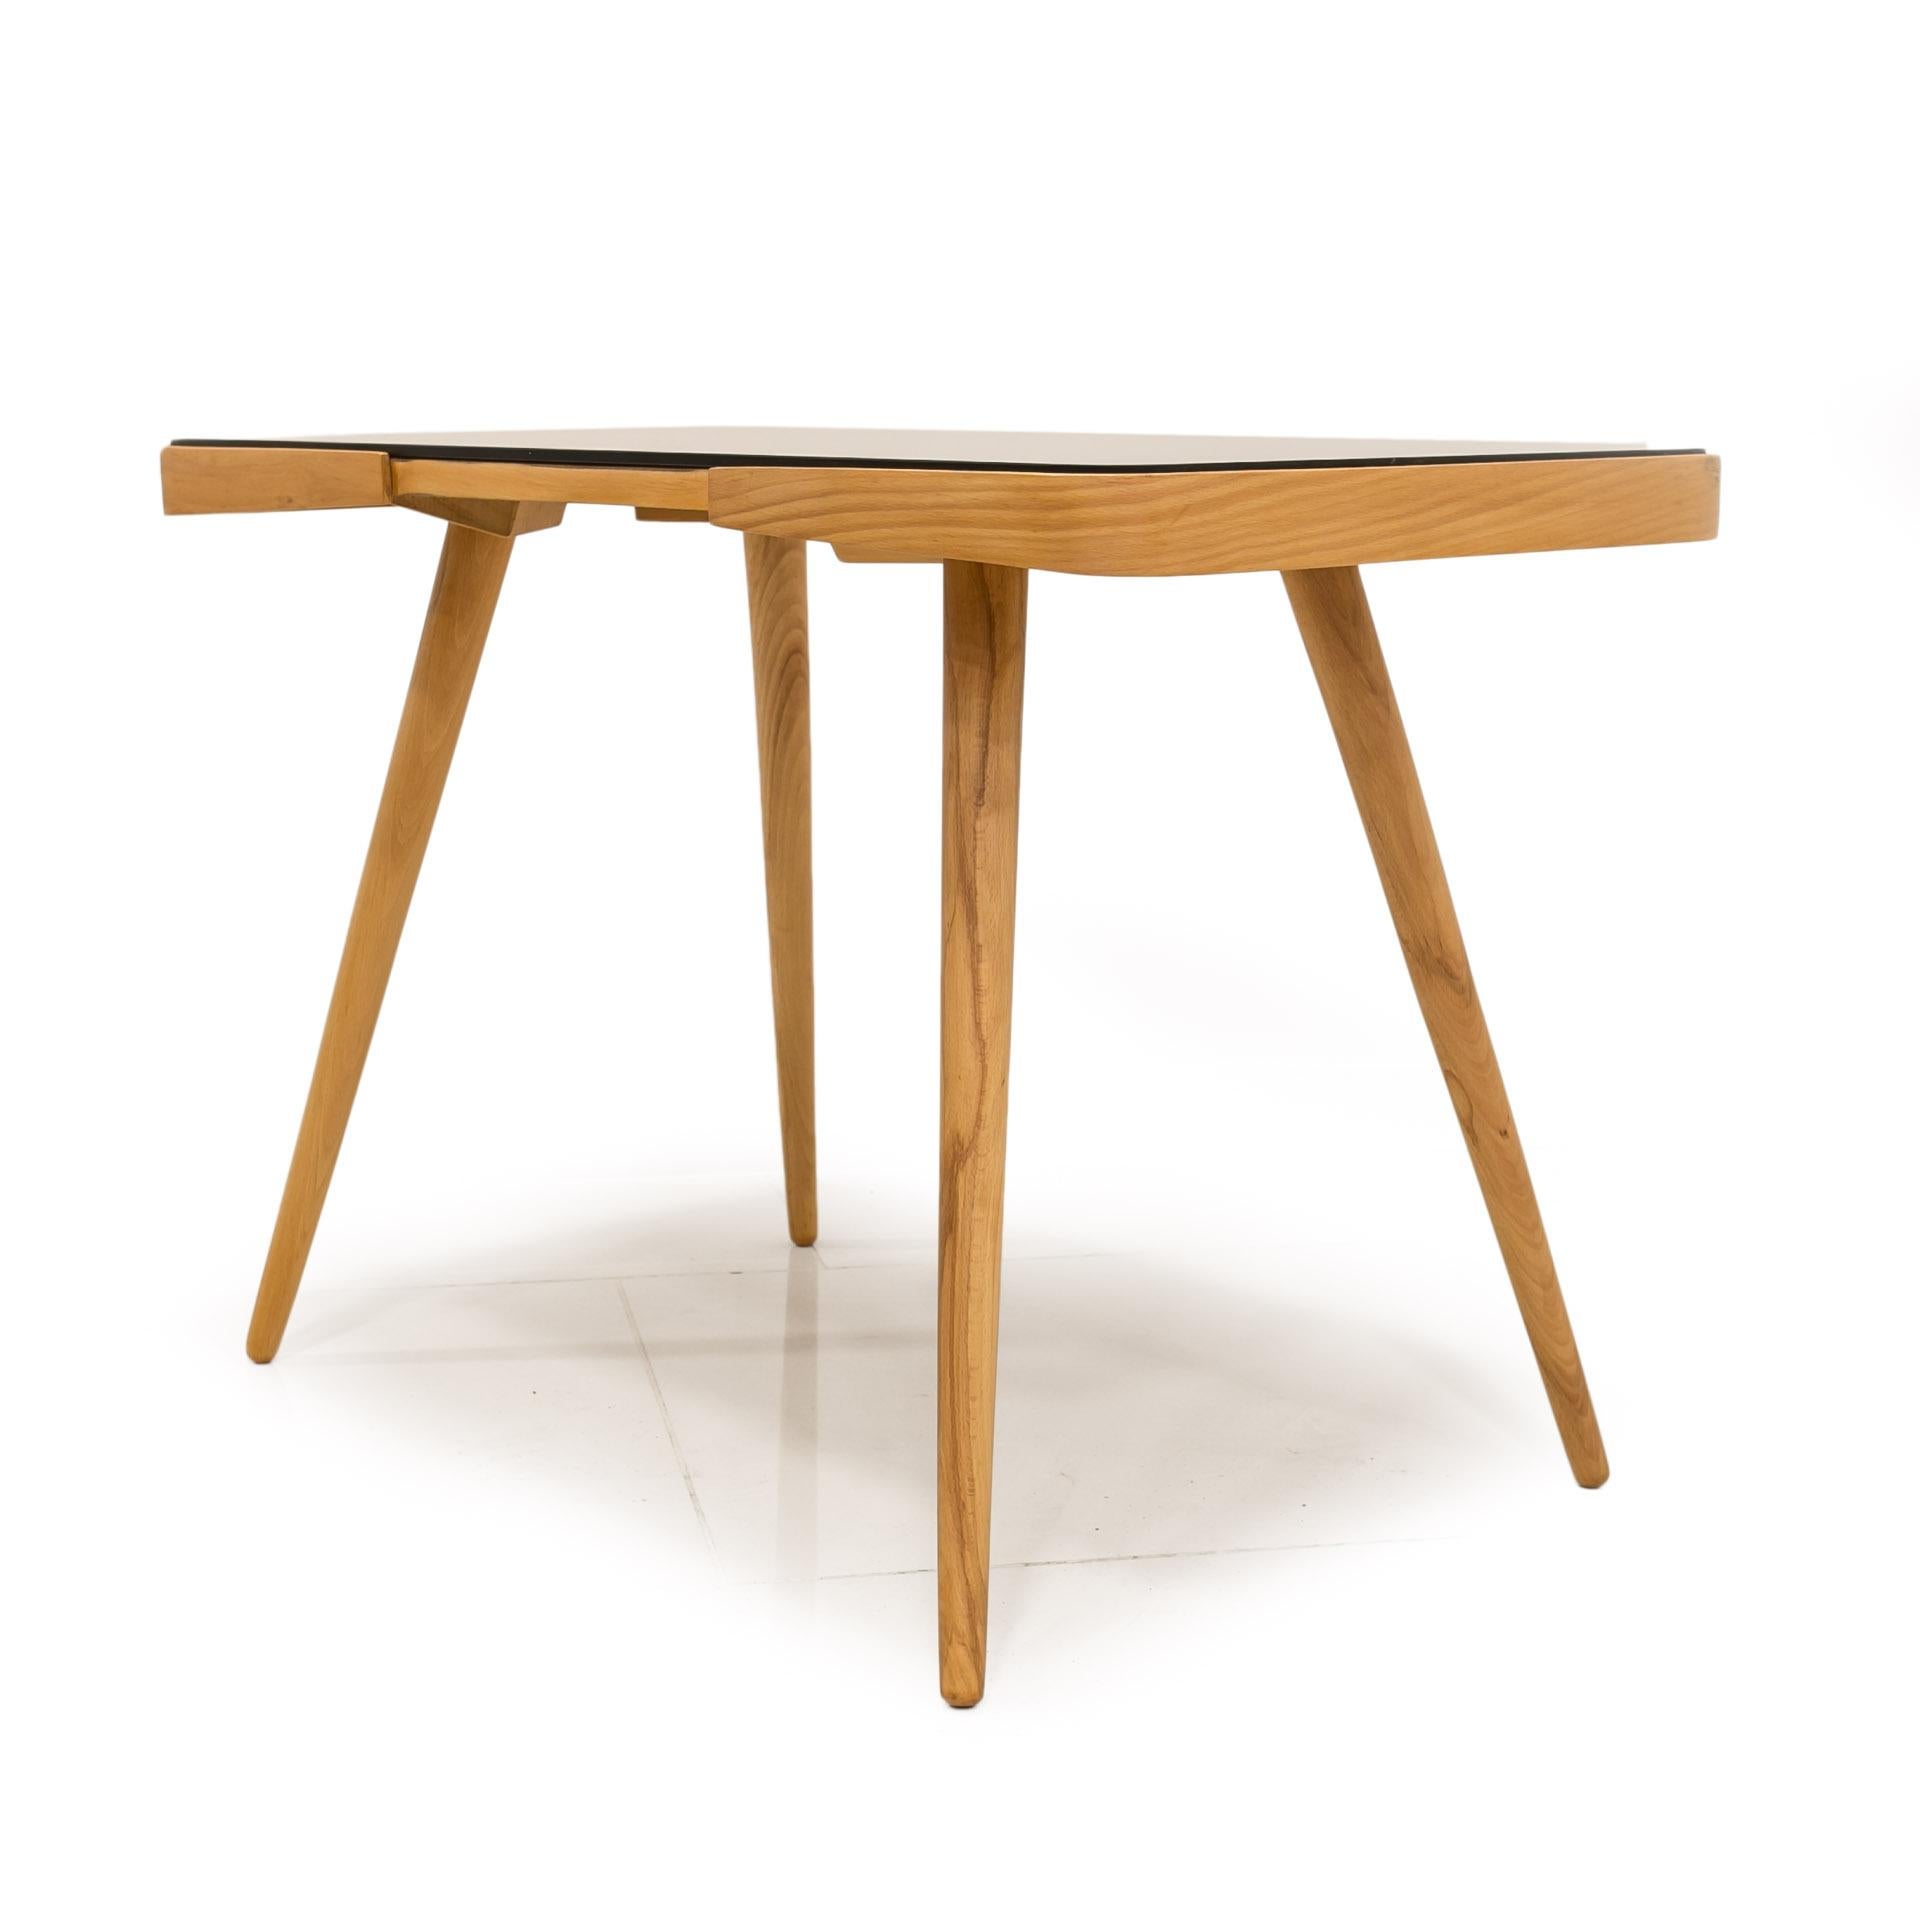 This beautiful coffee table was made in the 1960s, designed by Jiri Jiroutek and was awarded at the Expo fair in 1958 in Brussels. It features 4 slender legs and top made of beech wood, covered with black glass. The piece is professionally renovated